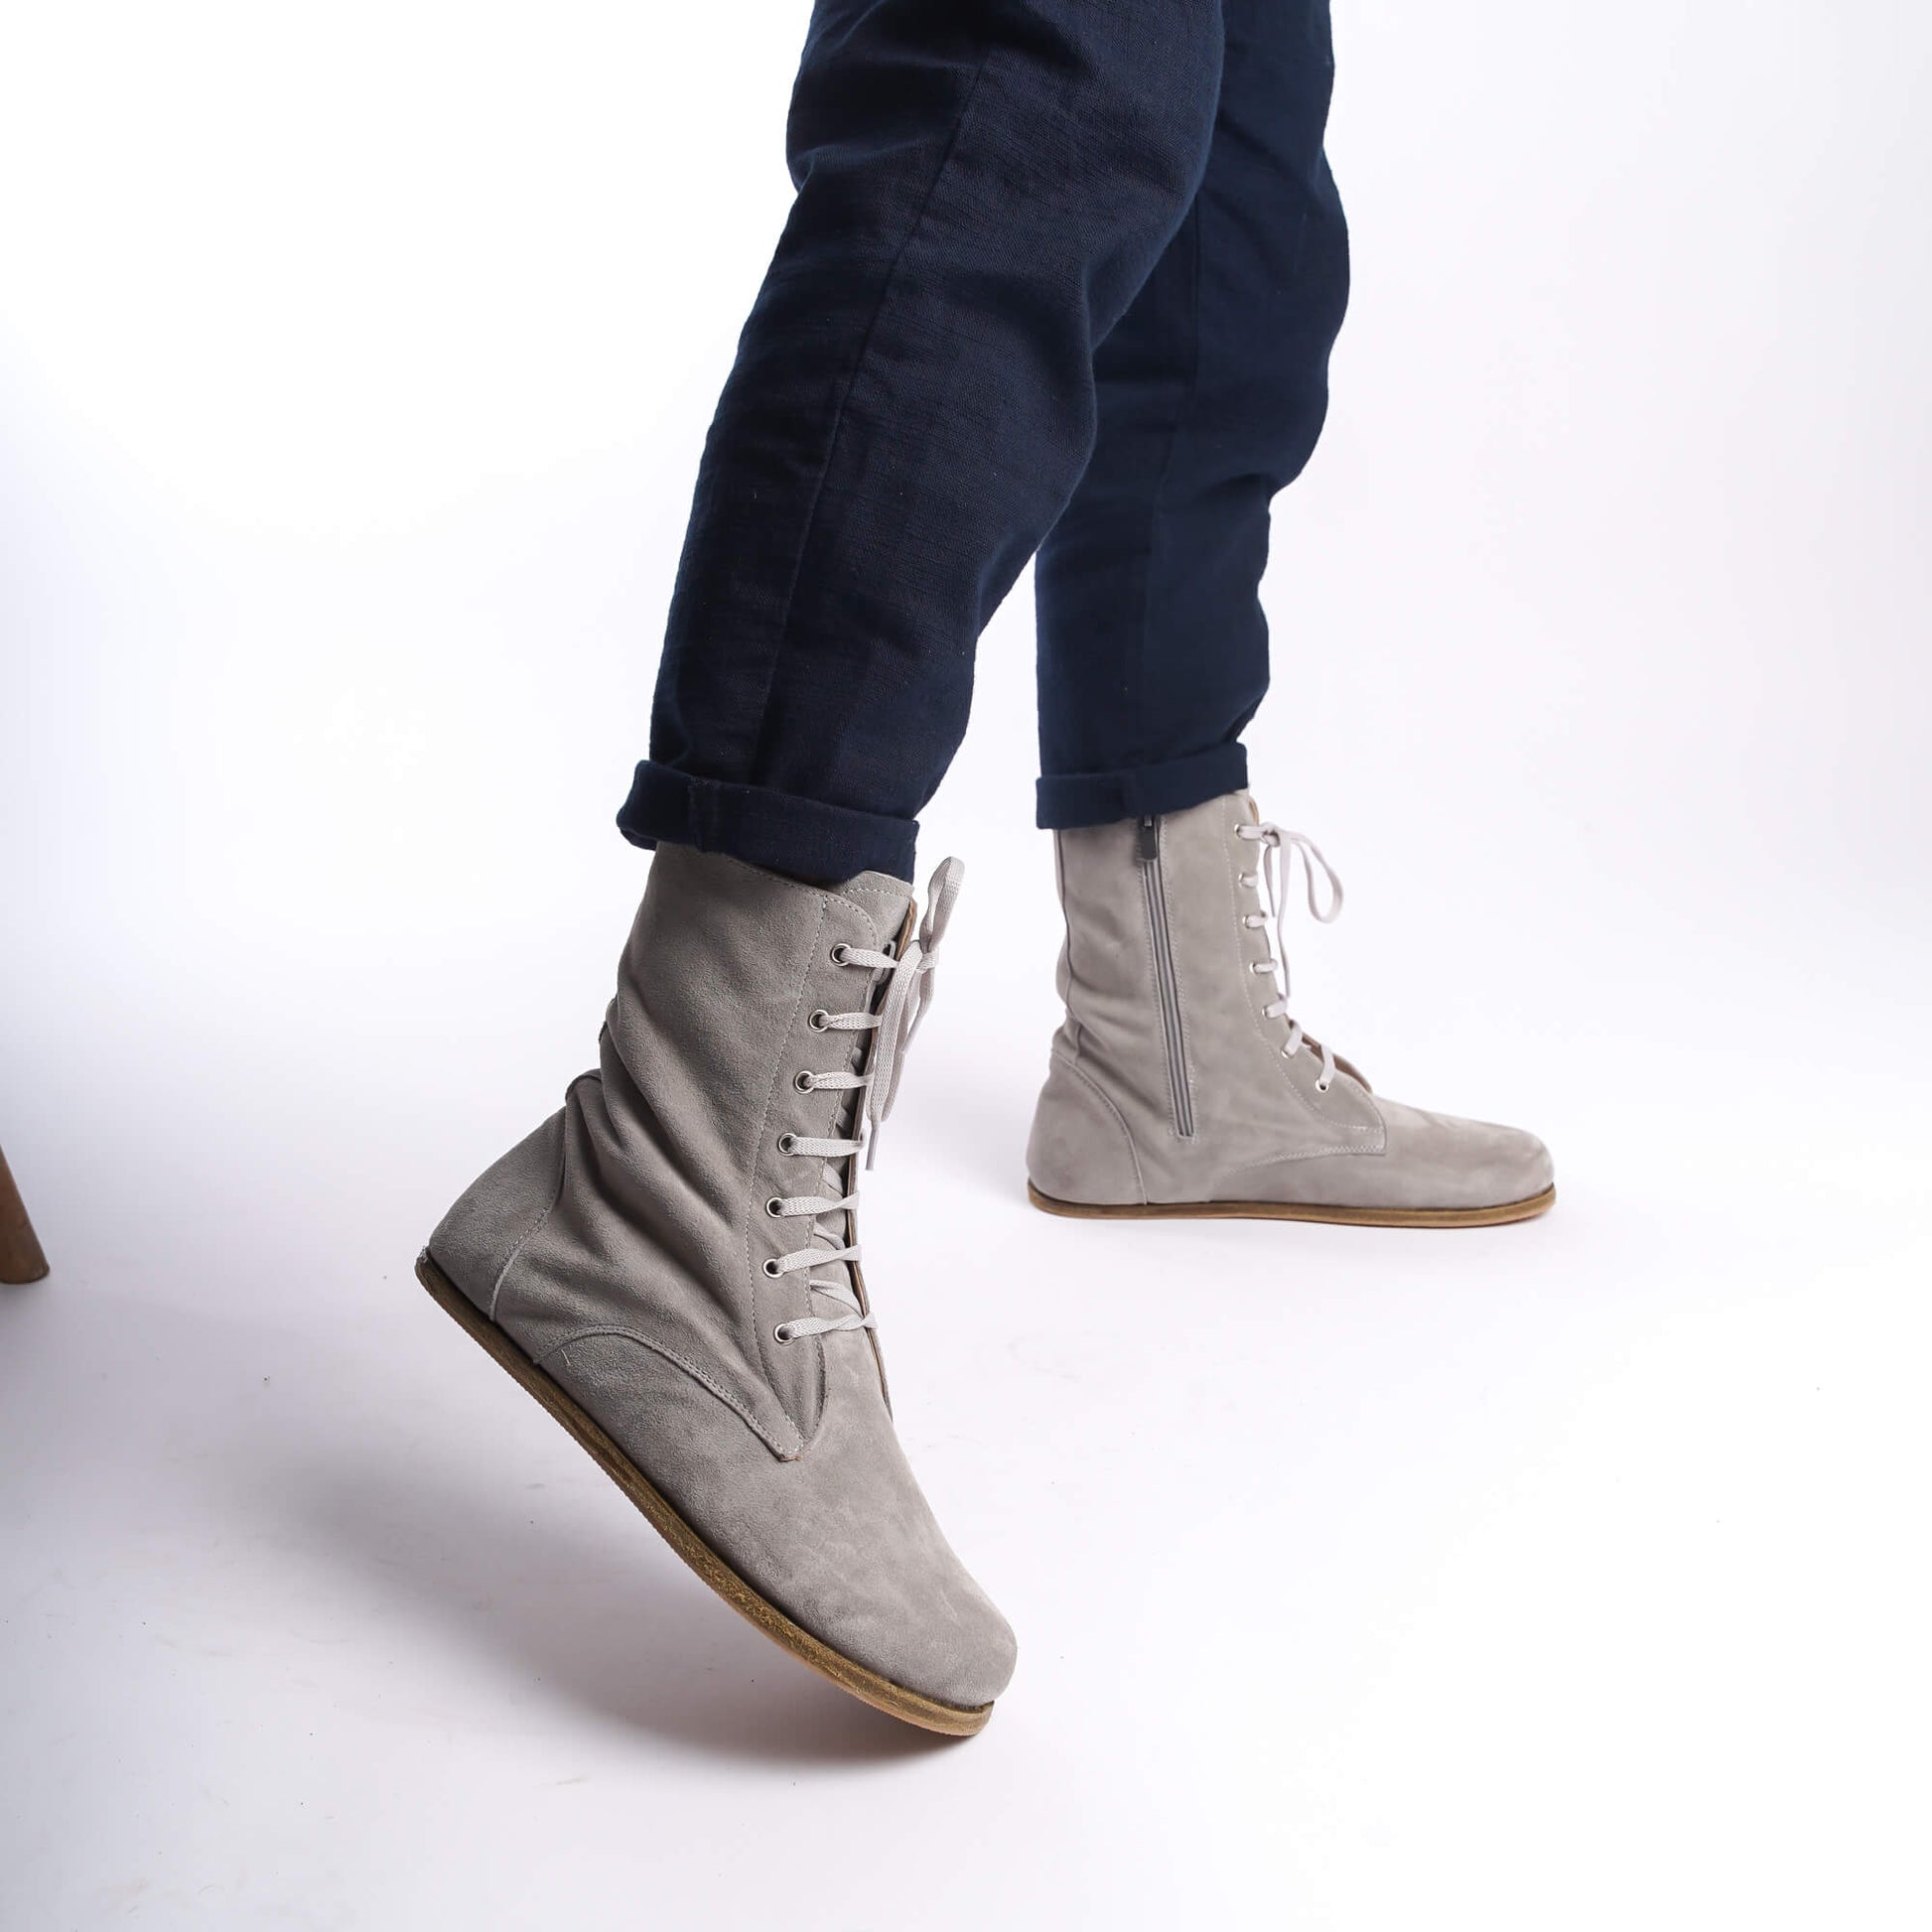 Gray leather barefoot boots for men, side profile with a zipper detail, perfect for winter.